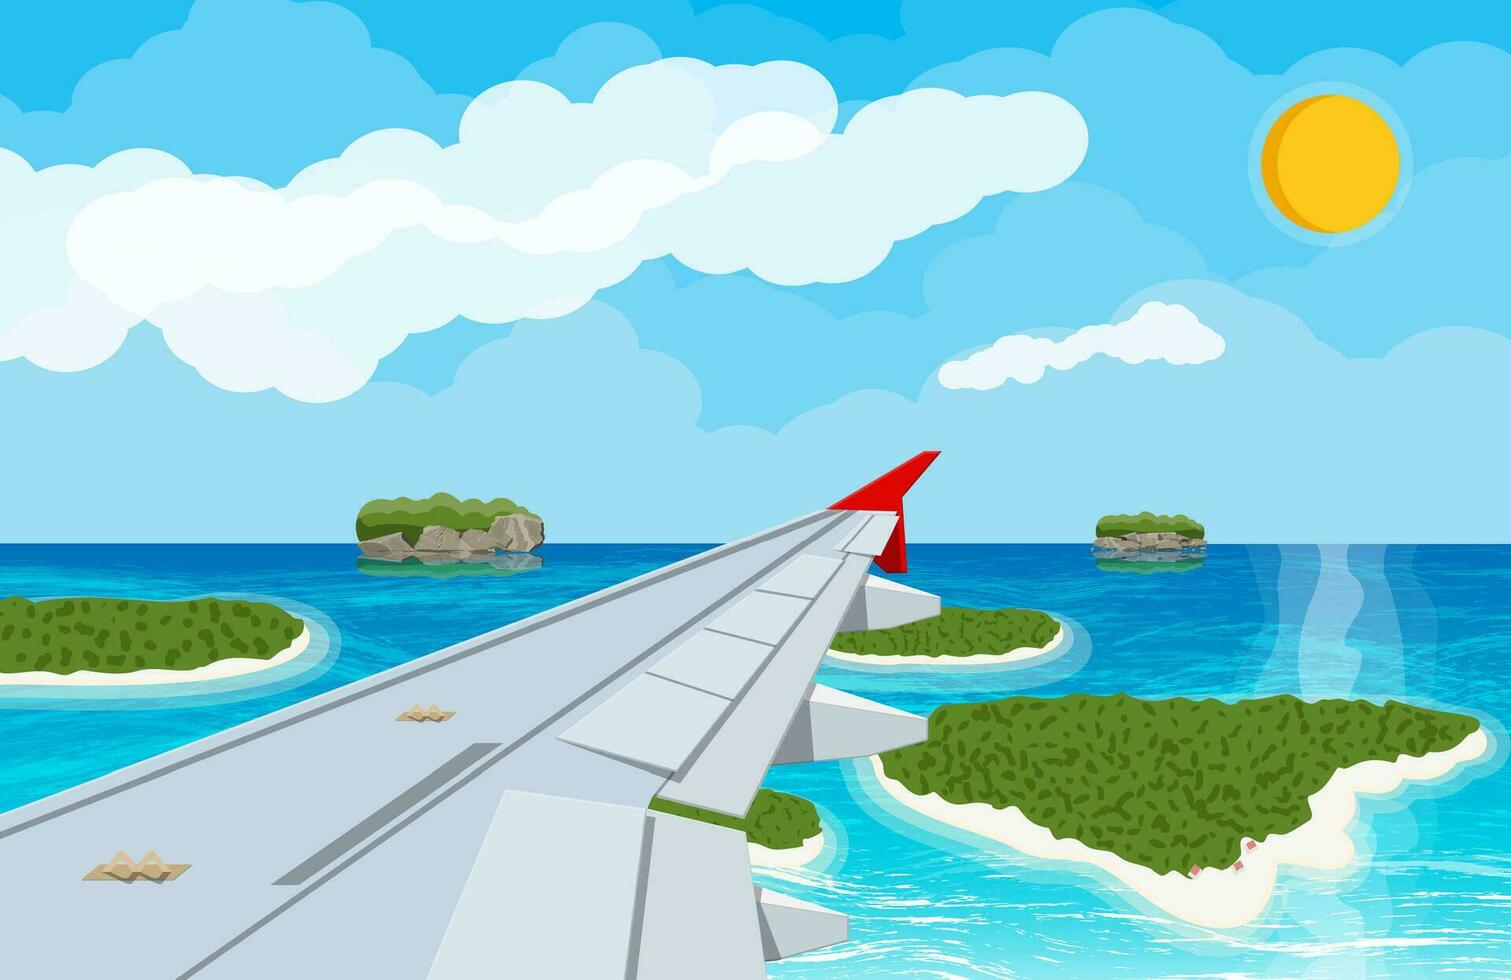 View of wing of aircraft in sky. Tropical islands with palm tree in ocean. Air journey or vacation concept. Sun and clouds. Vector illustration in flat style